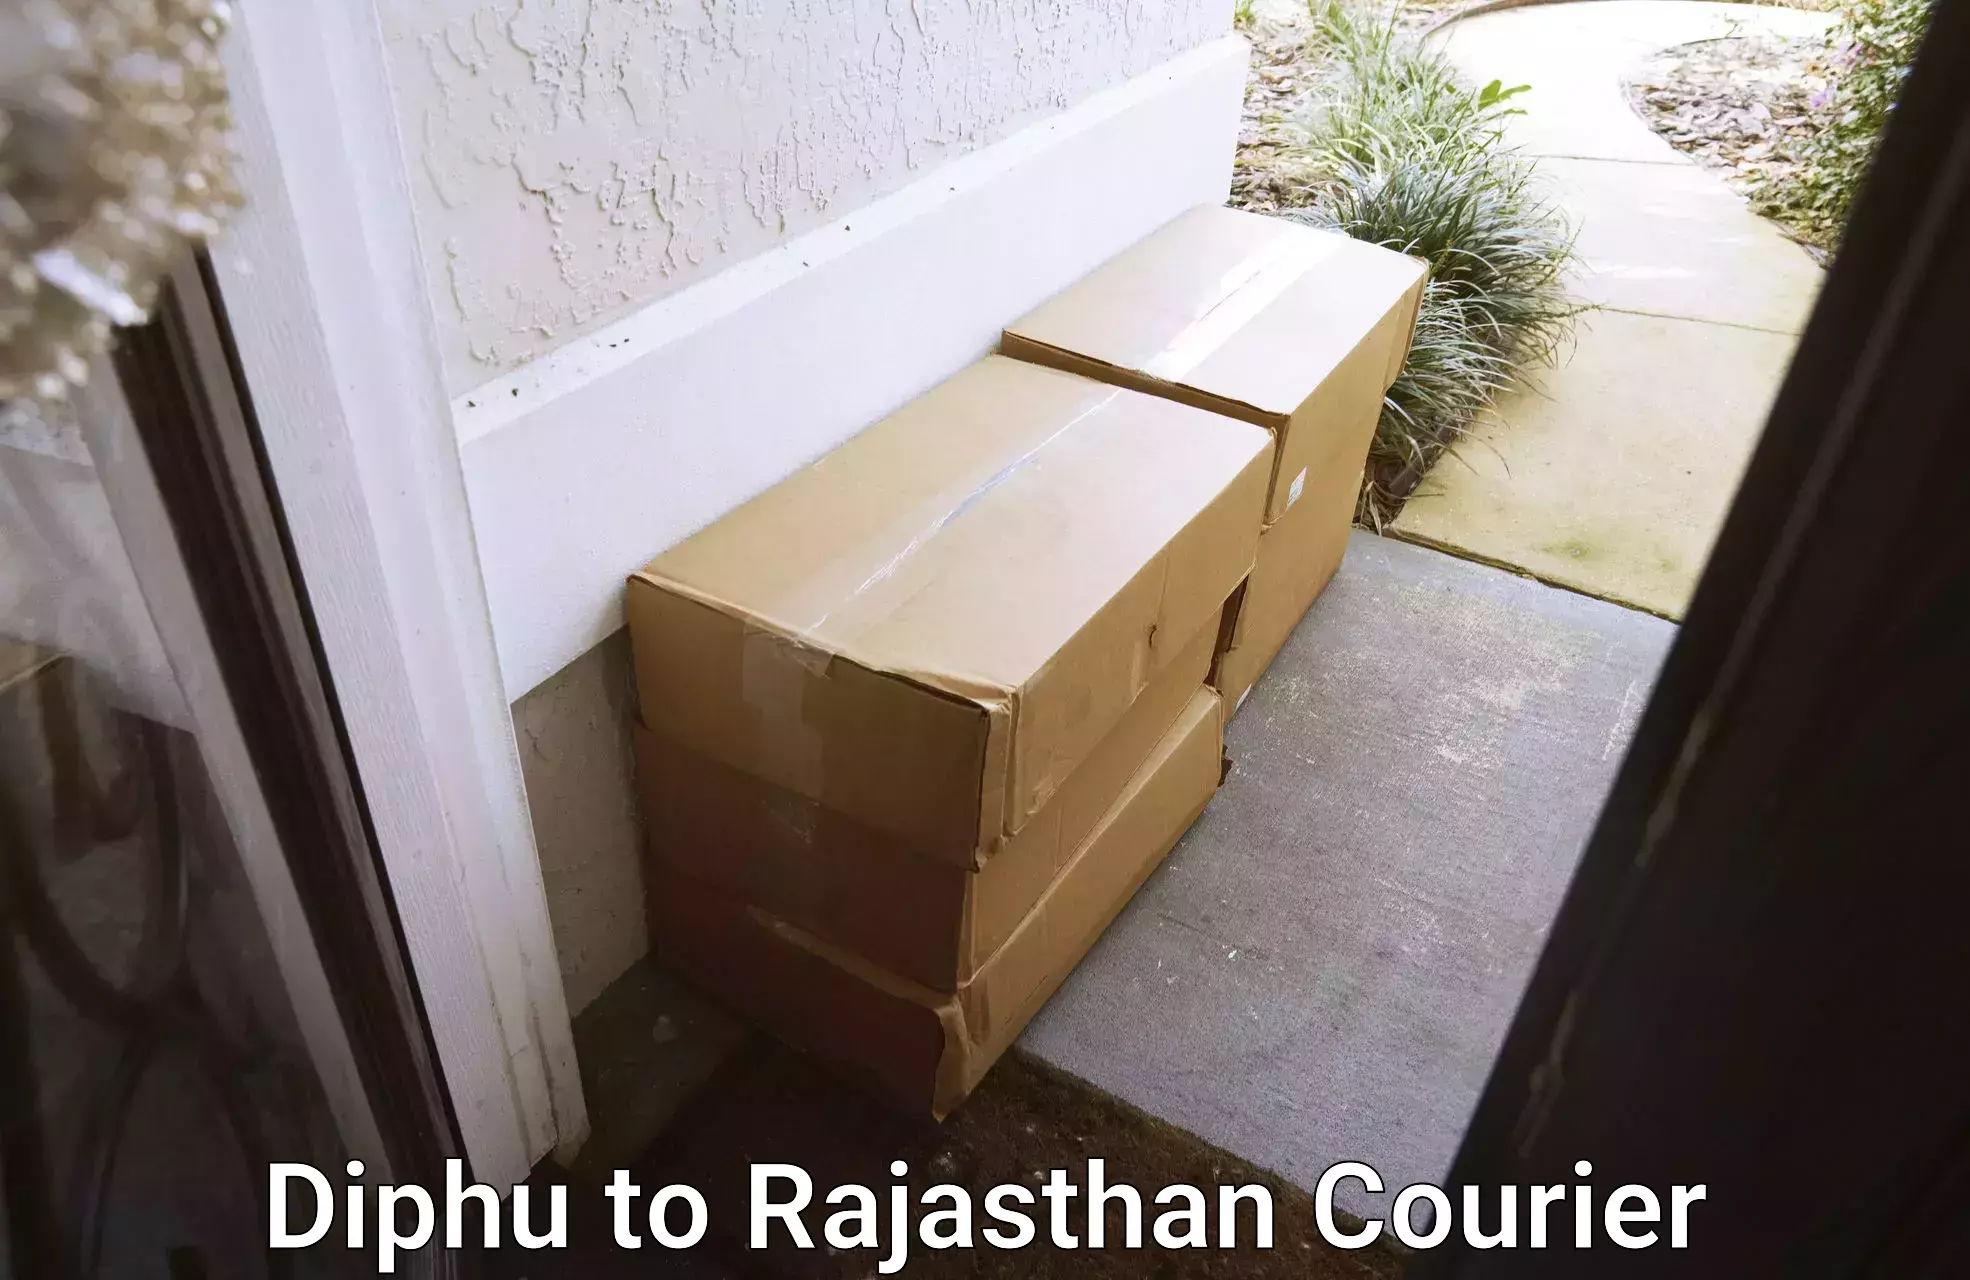 On-demand shipping options Diphu to Rajasthan